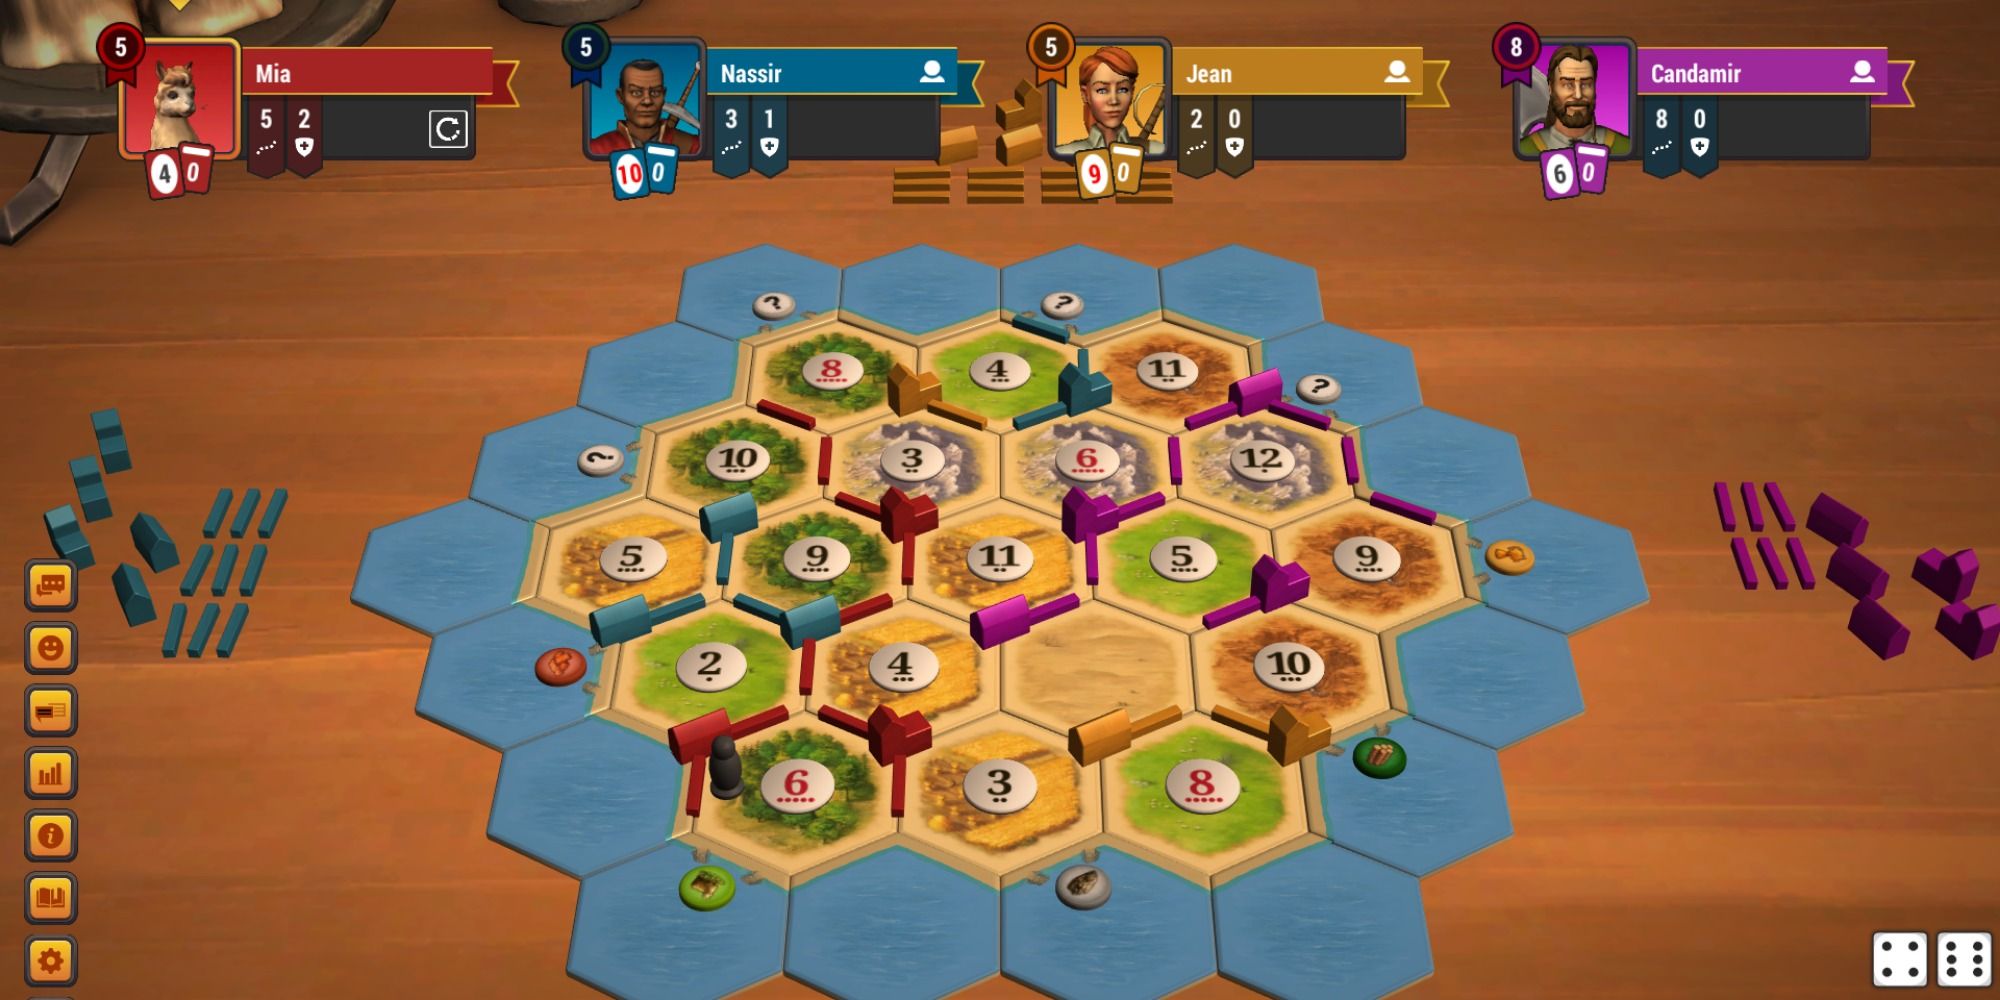 A Catan board game sits on a wooden table, with four icons for different players shown above